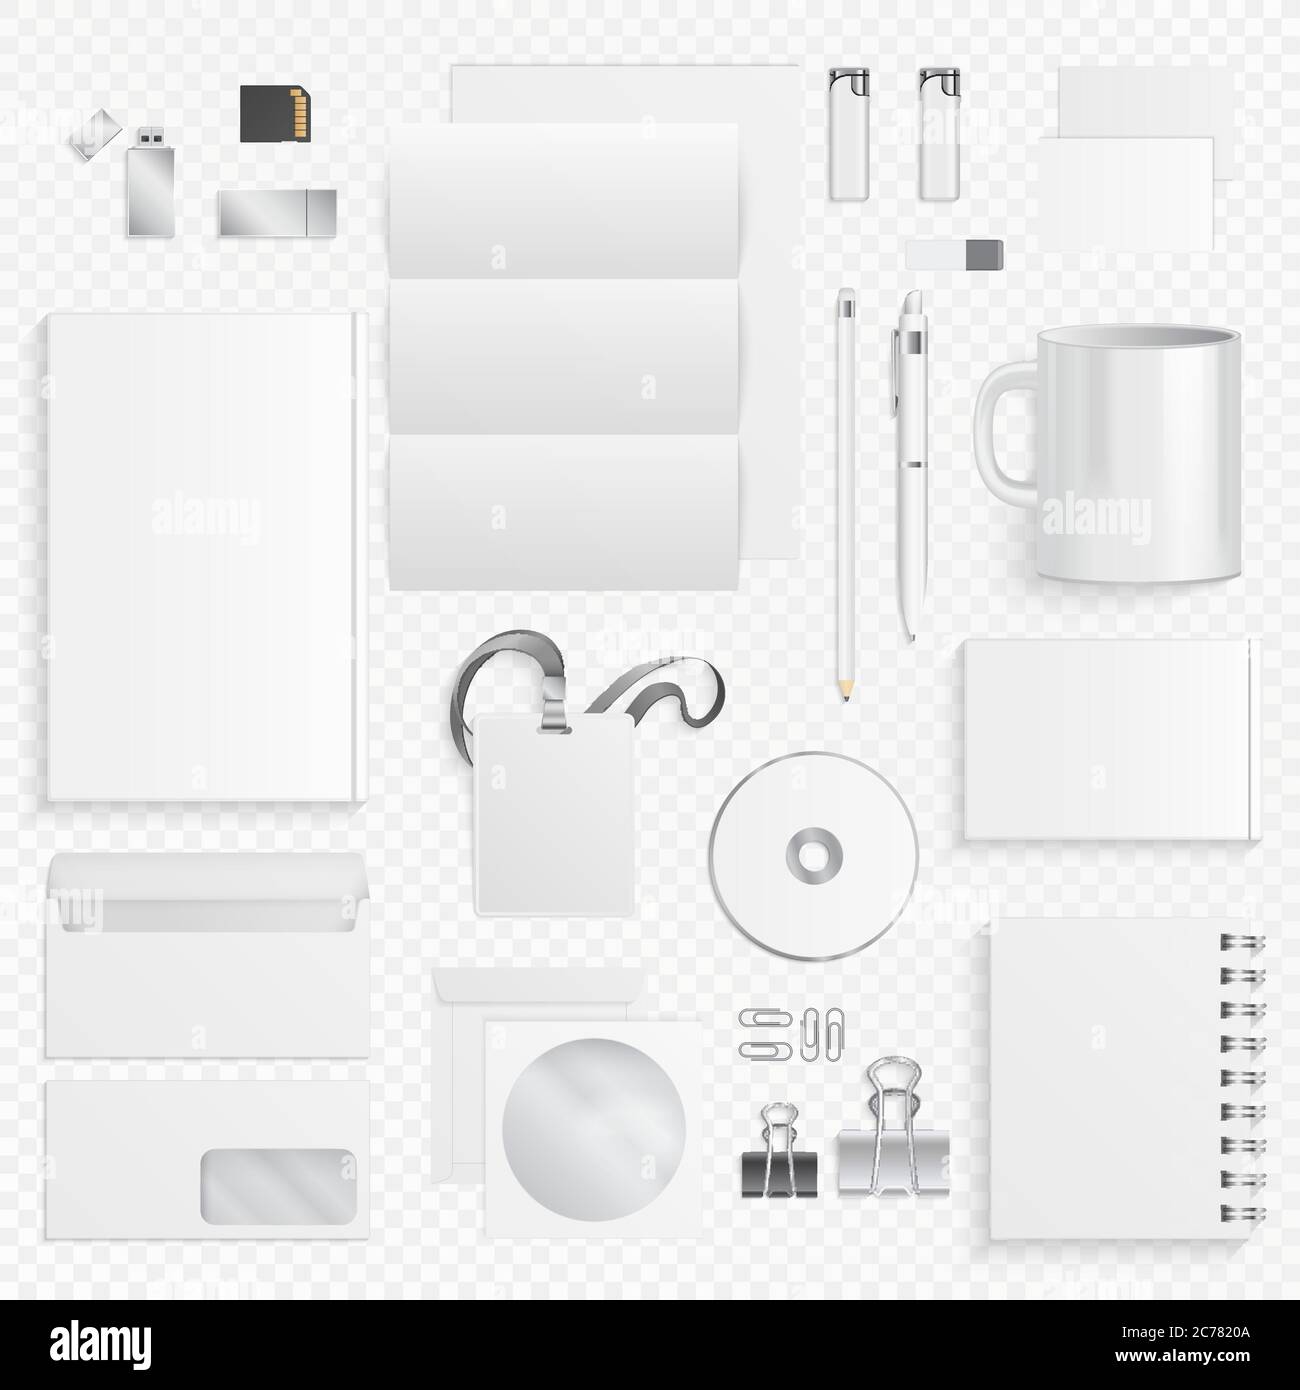 Corporate identity business items. Vector icons of supplies and office stationery, pen, business info card, envelope paper bag, mug and id badges notepads. Stock Vector